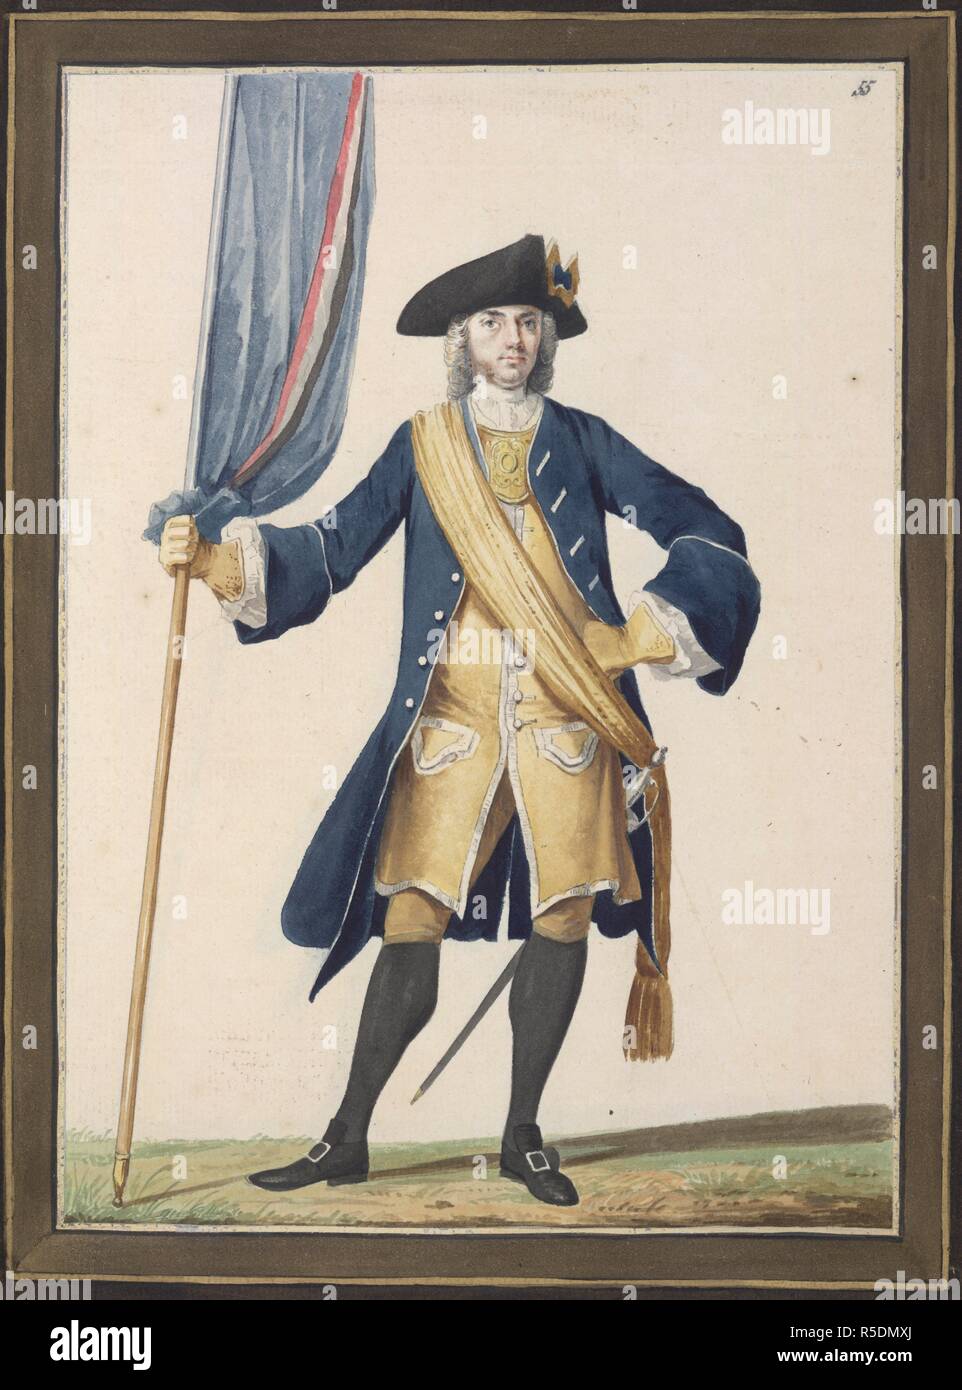 Dutch soldier holding standard. Drawings of Dutch Military Costumes and  Musket Exercises. Netherlands; 18th century. [Whole drawing] Illustration  of a Dutch soldier in uniform, with sash, holding a standard Image taken  from